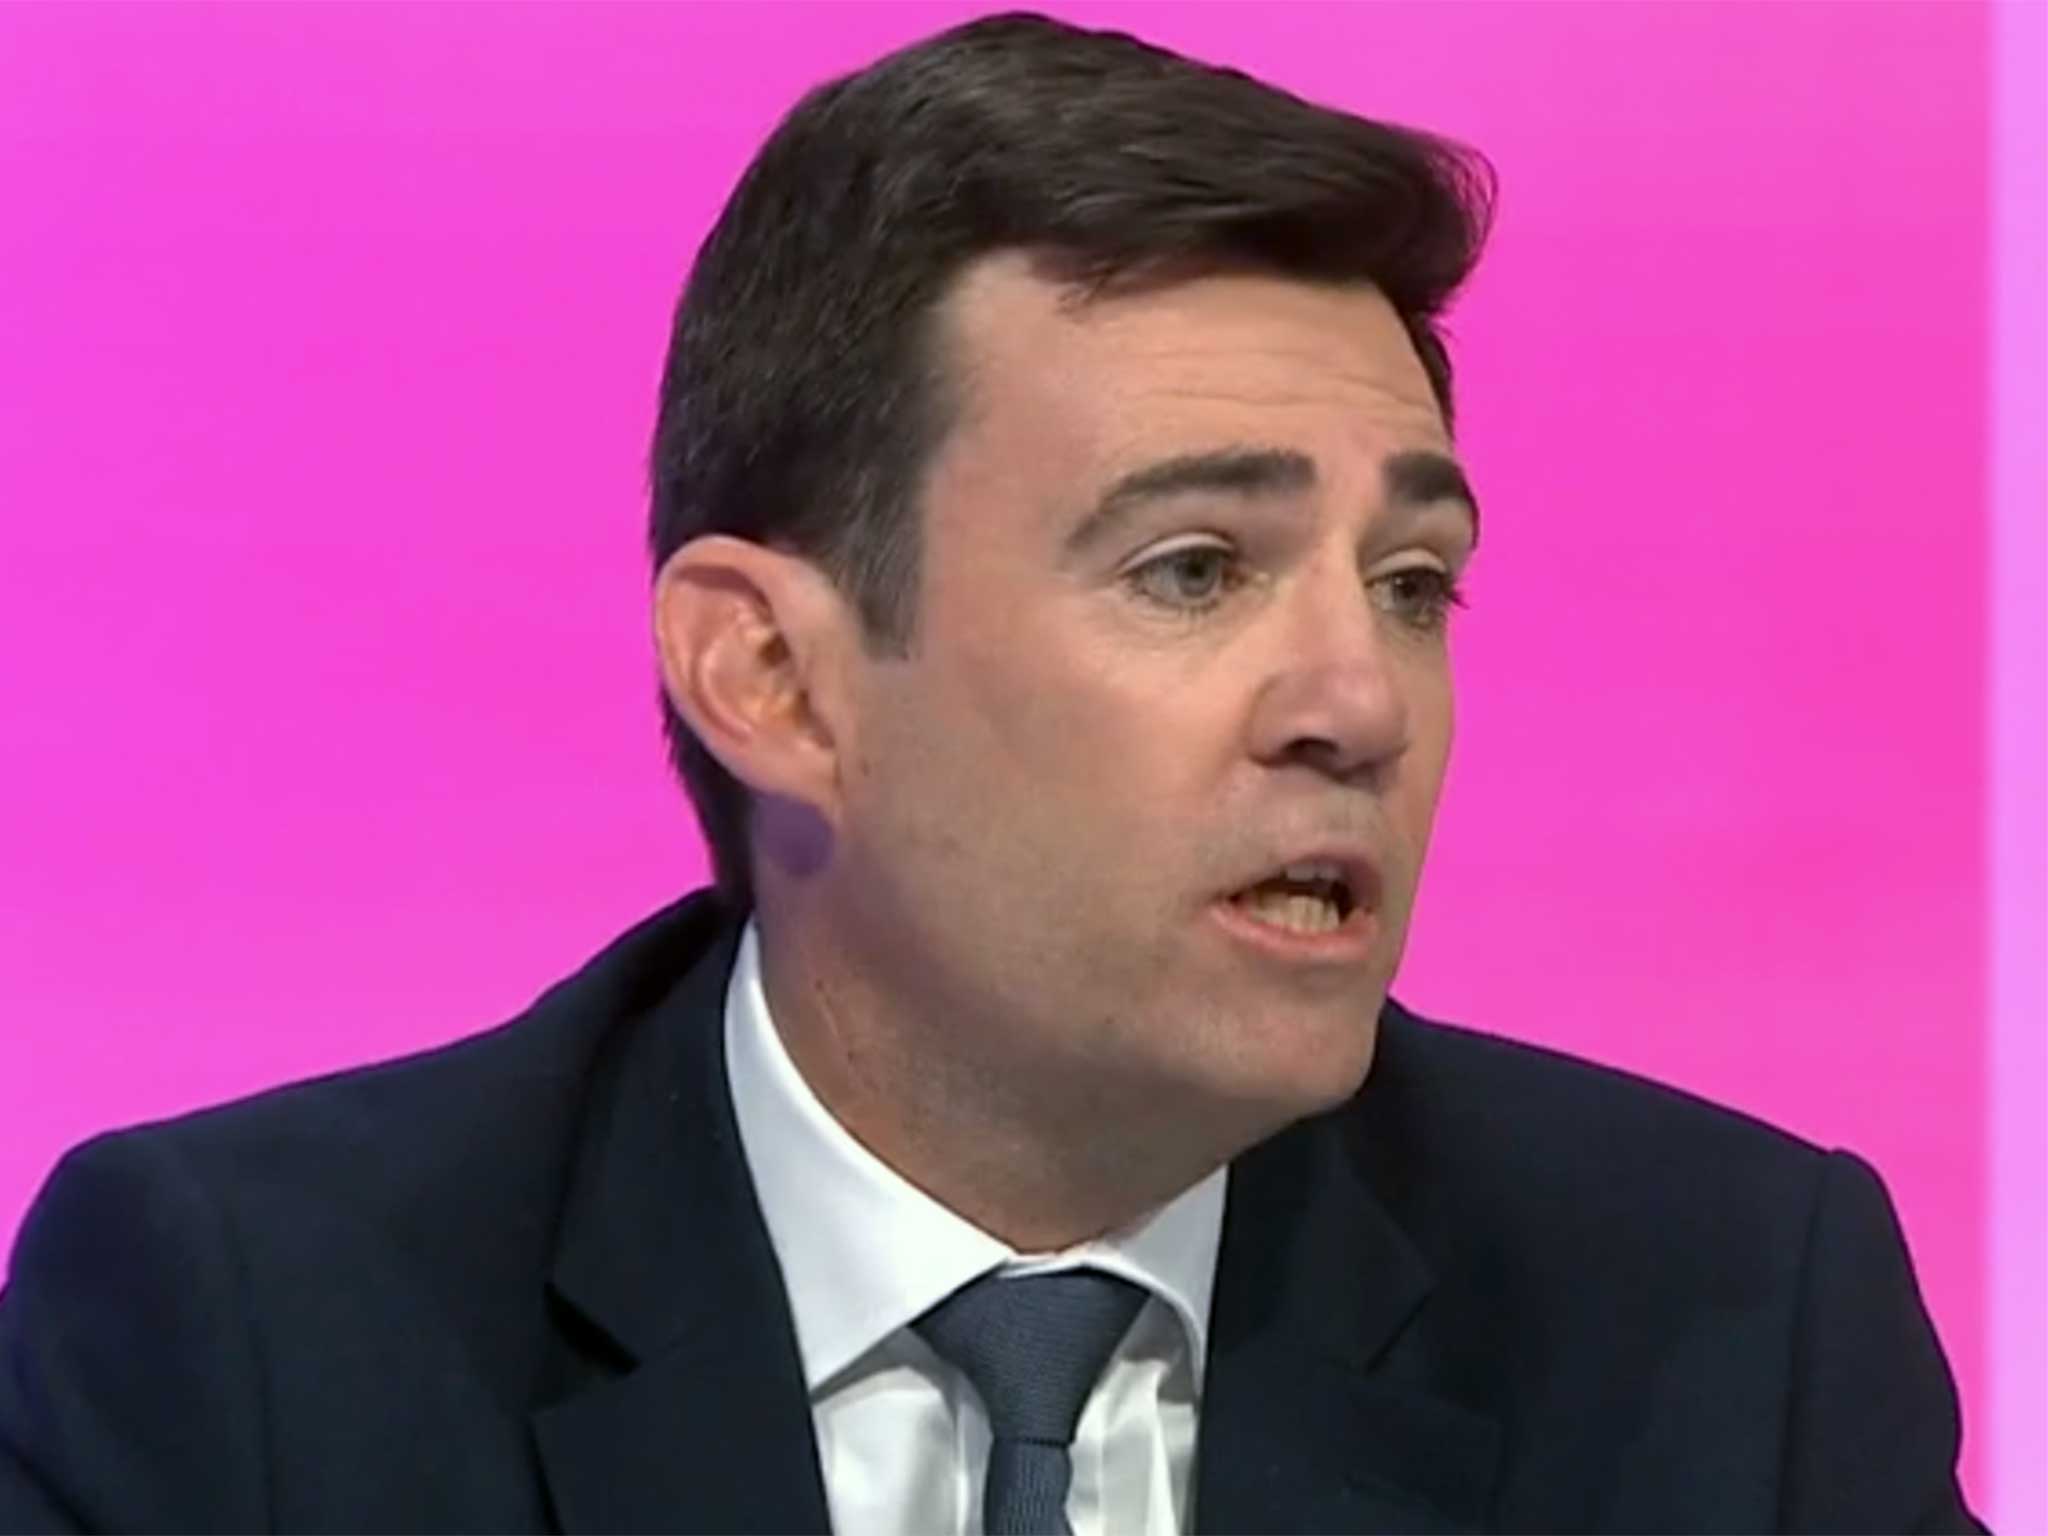 Andy Burnham said if antisemitism is found within Labour then 'expulsion should follow - no ifs, no buts'